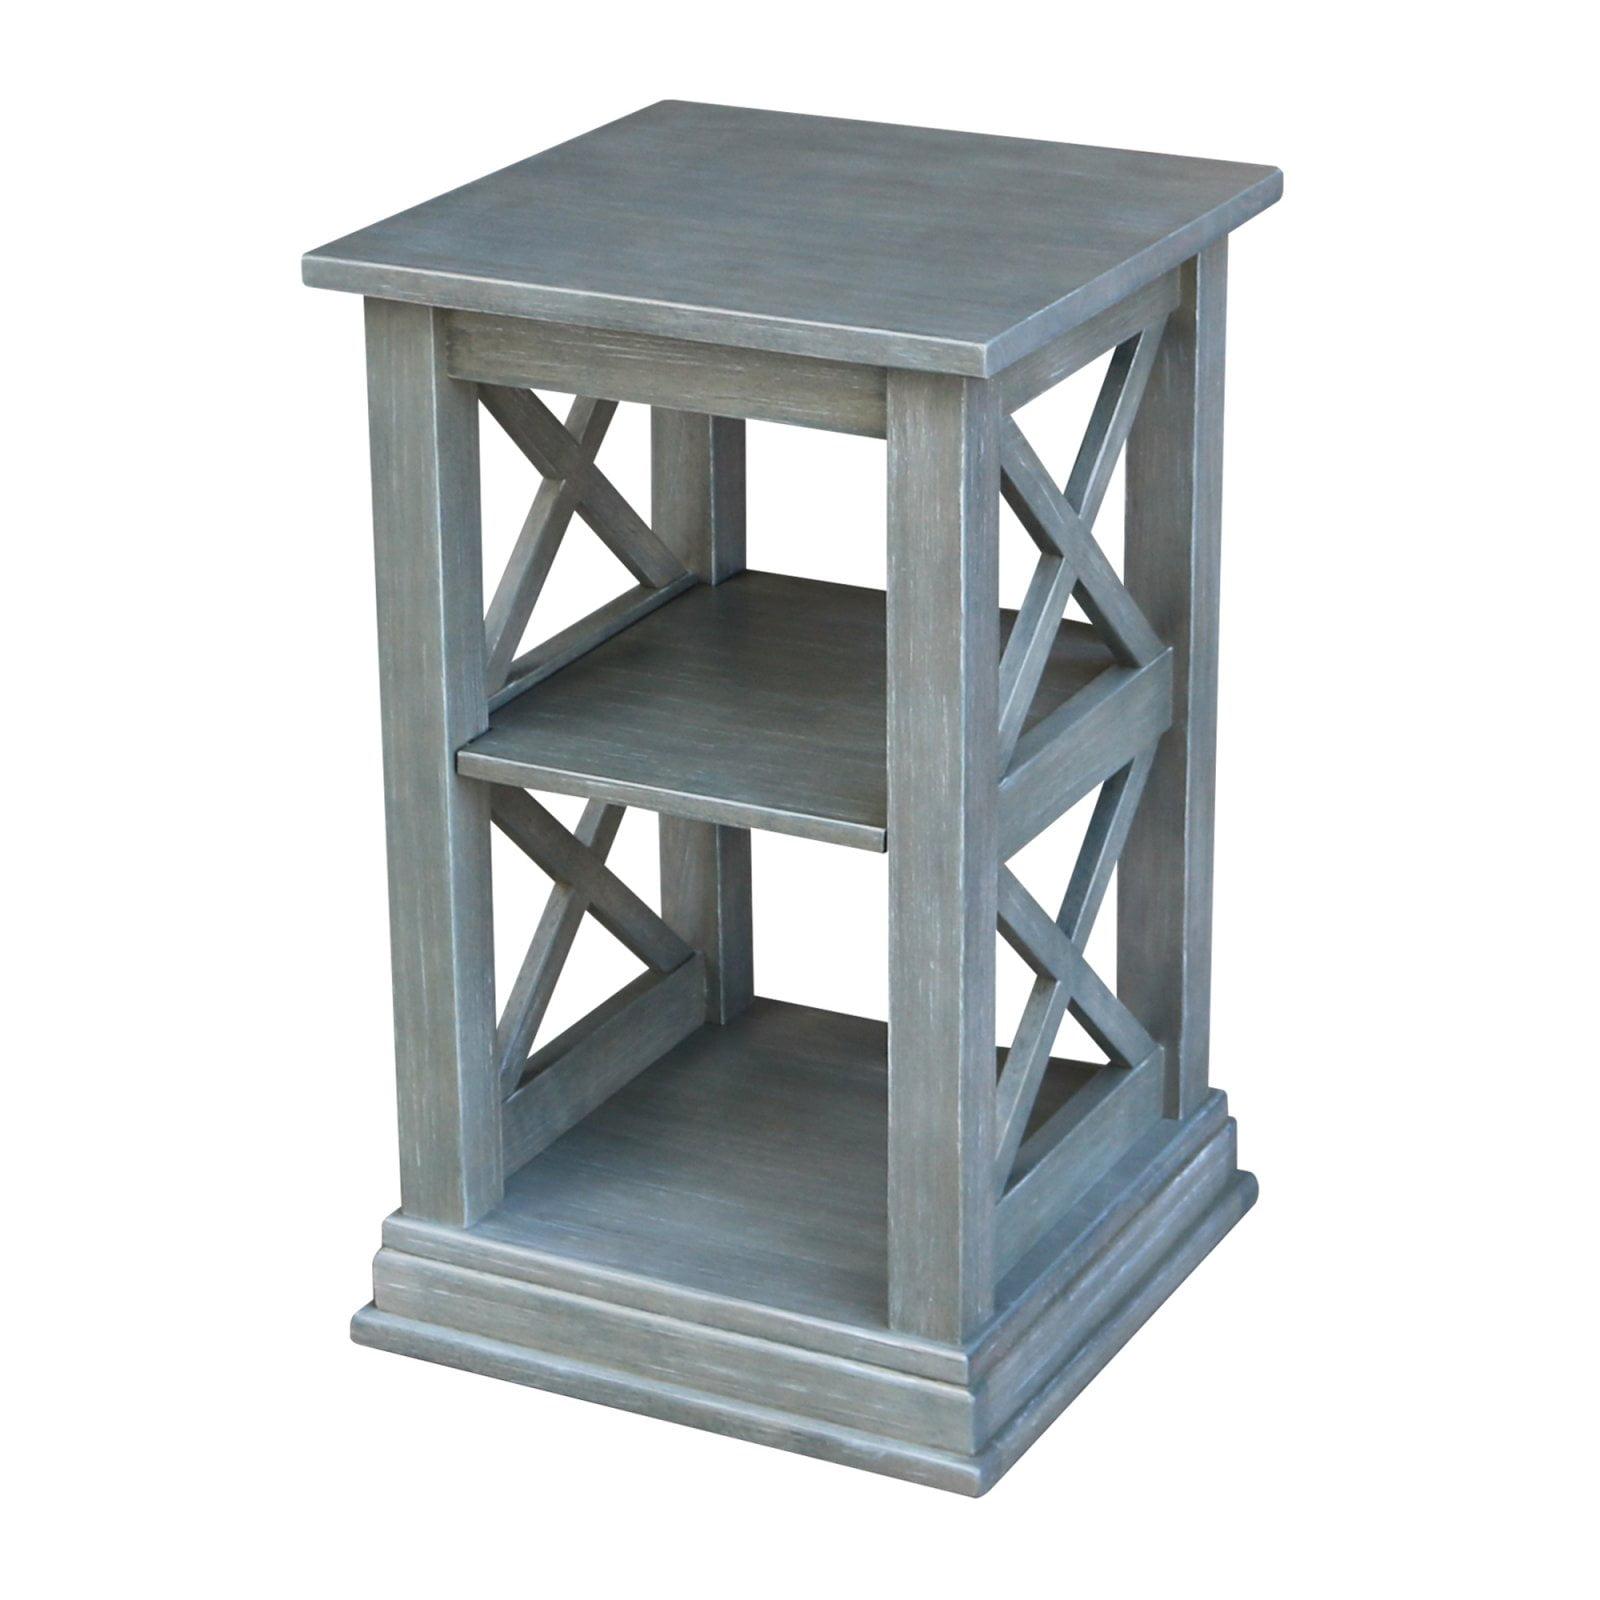 Heather Gray Solid Parawood Hampton Accent Table with Shelves